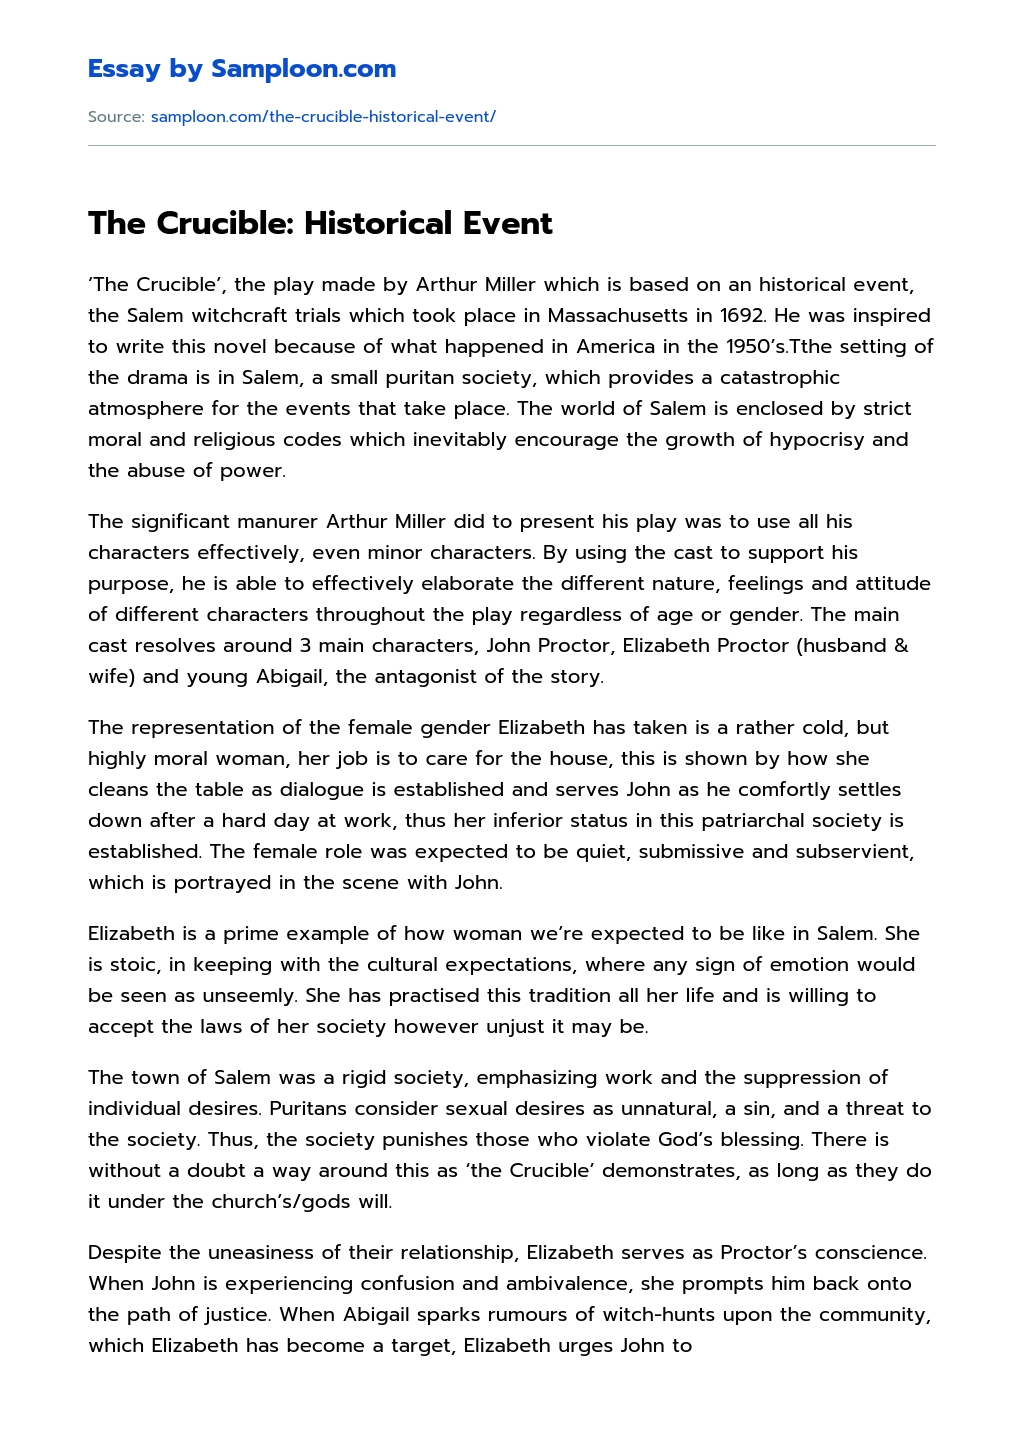 The Crucible: Historical Event essay